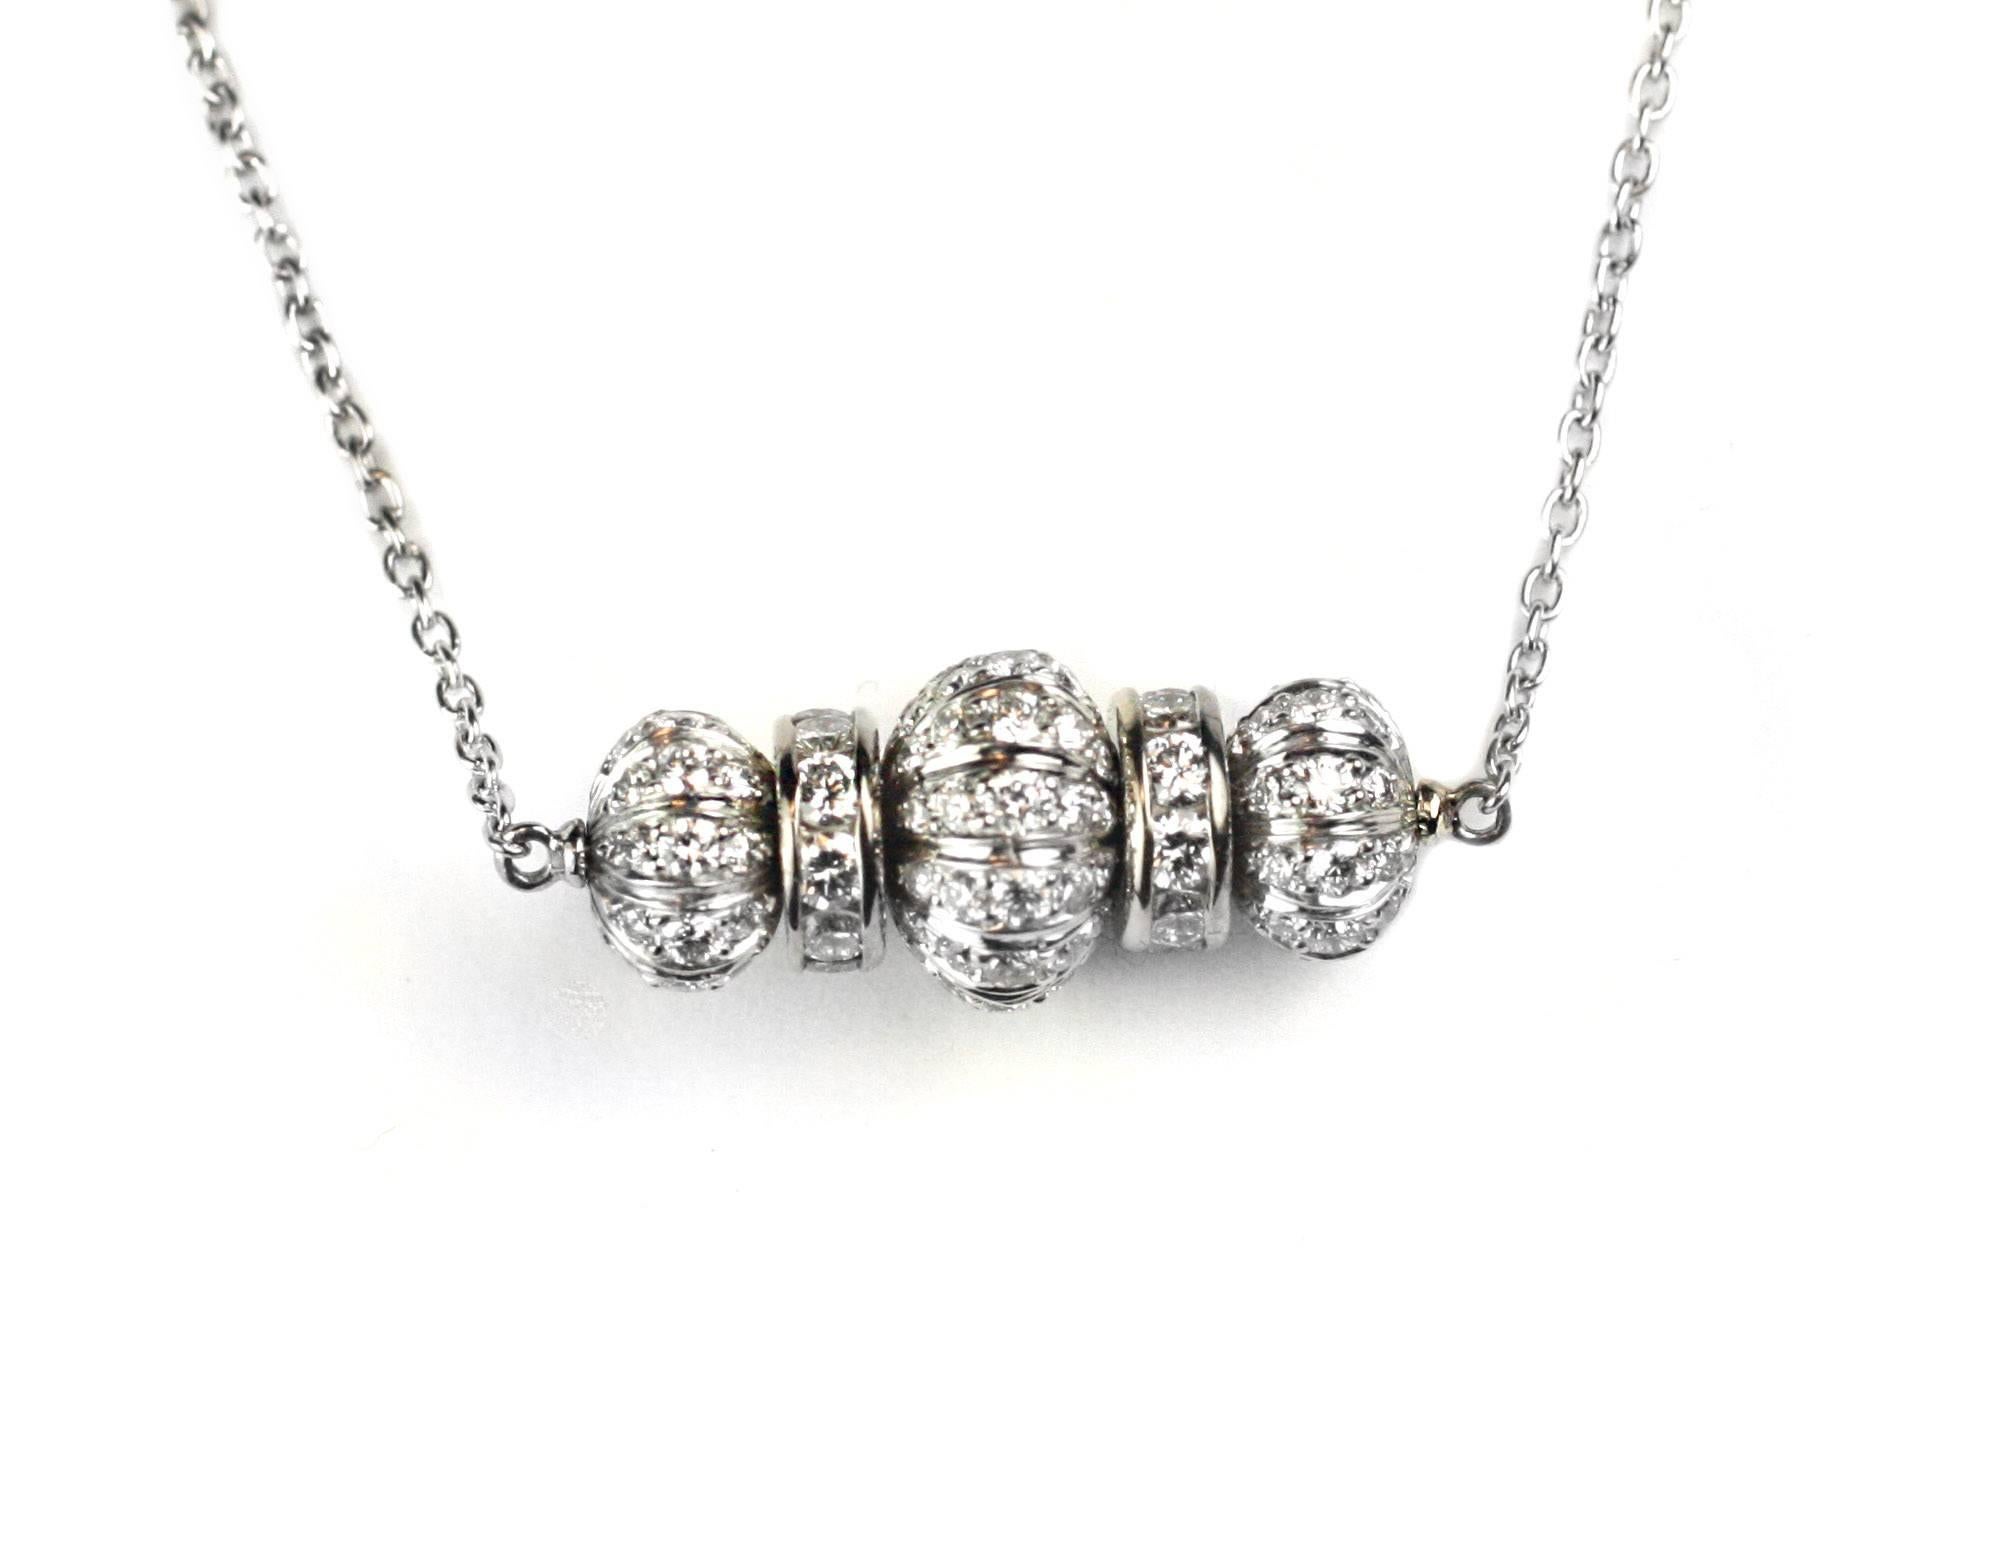 This beautiful necklace is made with platinum diamond beads & 18kt white gold diamond rondelles. Attached to a platinum link 1.5mm chain measuring 18 1/2 inches long.

Designed and made in house by Julius Cohen New York.